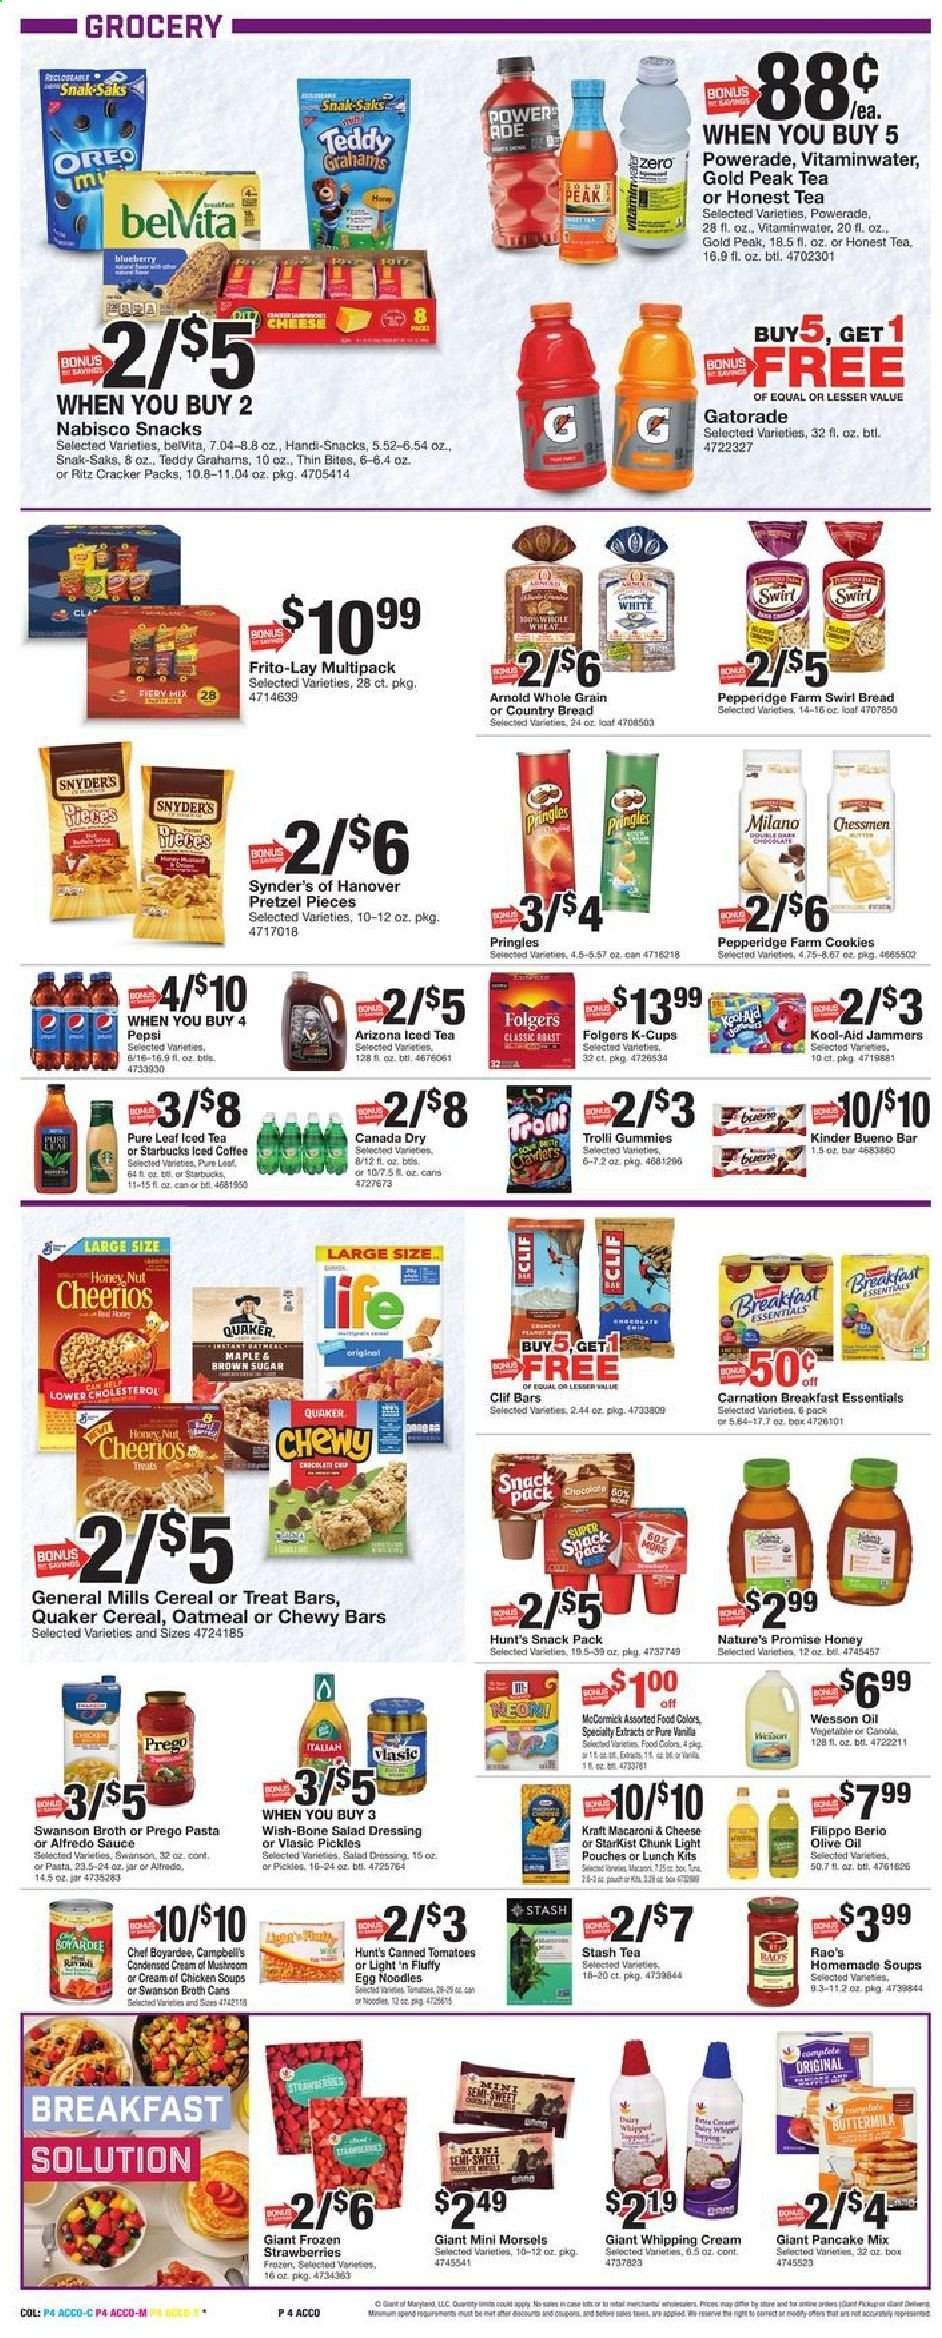 thumbnail - Giant Food Flyer - 02/26/2021 - 03/04/2021 - Sales products - bread, pretzels, Nature’s Promise, pancakes, pears, tuna, StarKist, macaroni & cheese, sauce, Quaker, Alfredo sauce, Kraft®, Oreo, buttermilk, whipping cream, strawberries, pickles, cookies, Trolli, crackers, Kinder Bueno, RITZ, Pringles, Frito-Lay, cane sugar, oatmeal, broth, Chef Boyardee, cereals, Cheerios, belVita, egg noodles, pasta, noodles, salad dressing, dressing, olive oil, honey, Canada Dry, Powerade, Pepsi, AriZona, Gold Peak Tea, Gatorade, iced coffee, Pure Leaf, Starbucks, Folgers, coffee capsules, K-Cups. Page 4.